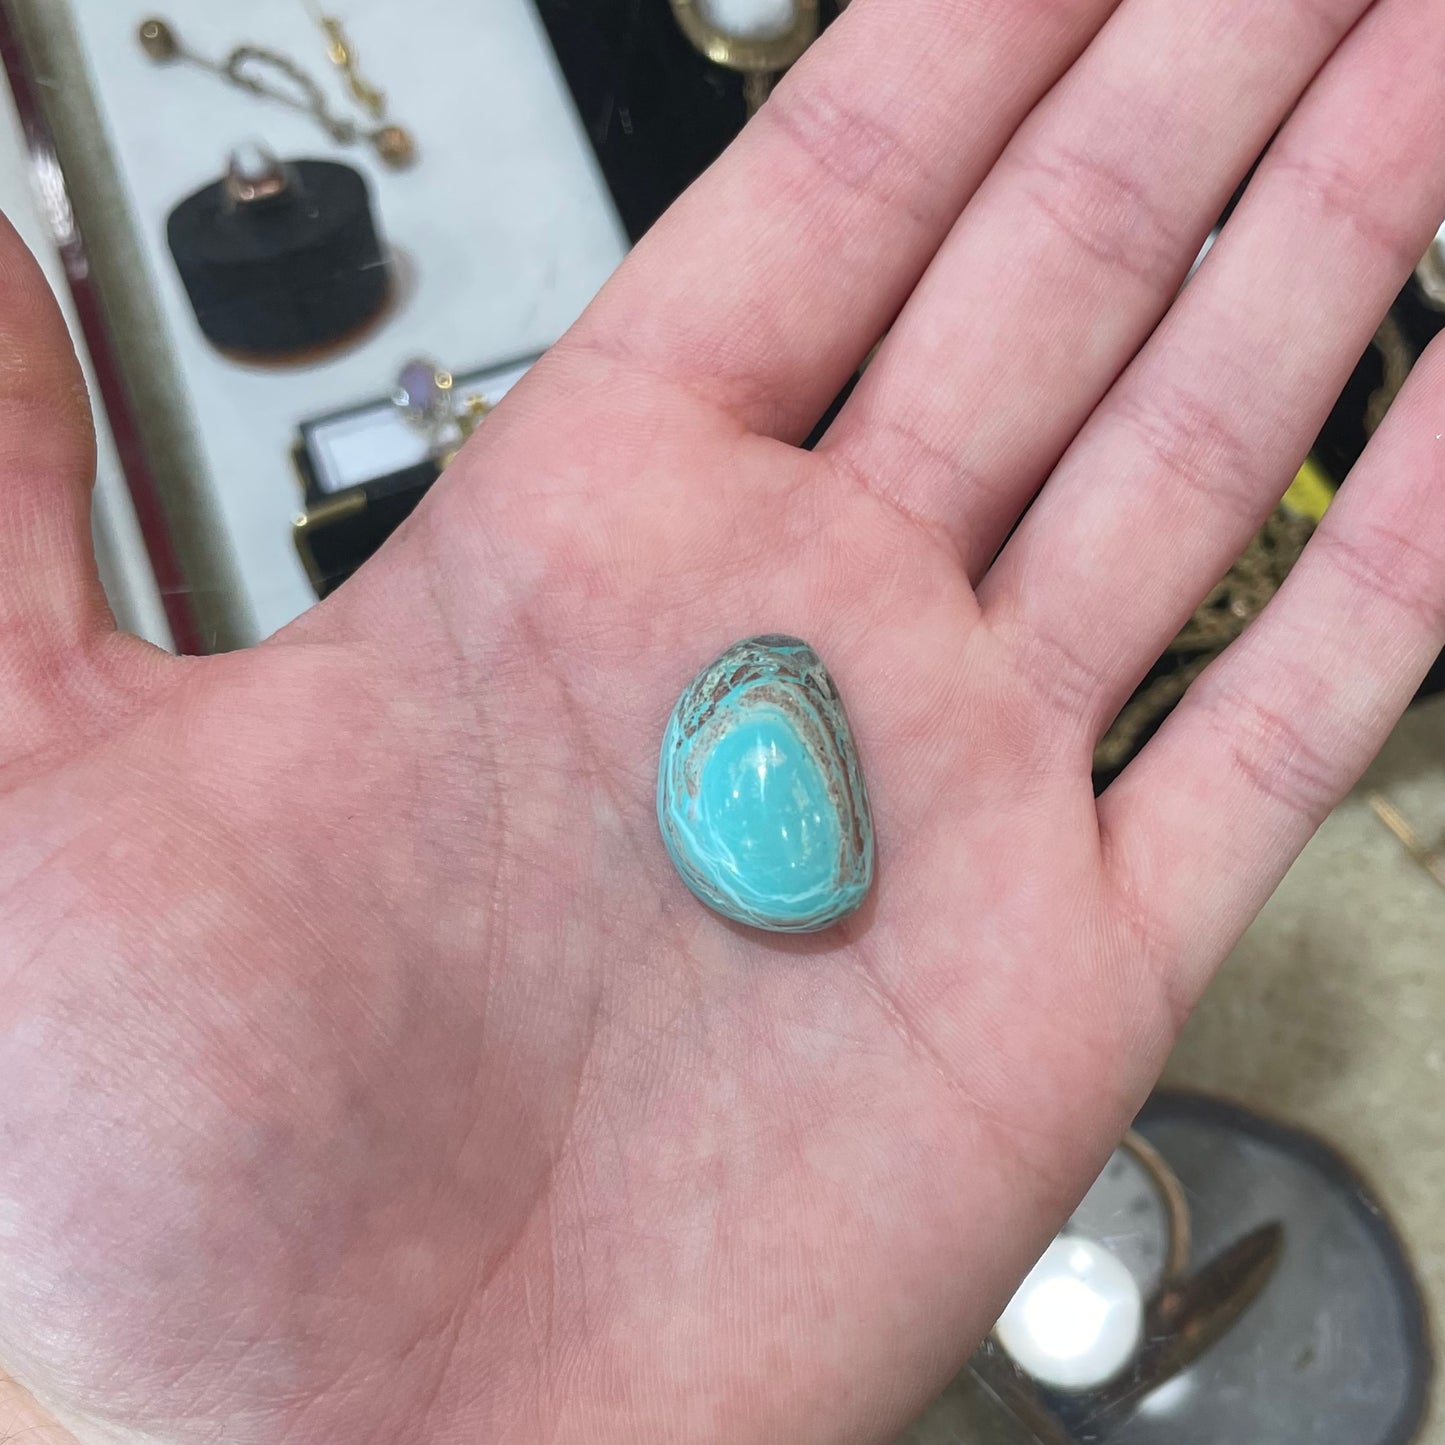 A polished, light blue Eilat Stone from Israel.